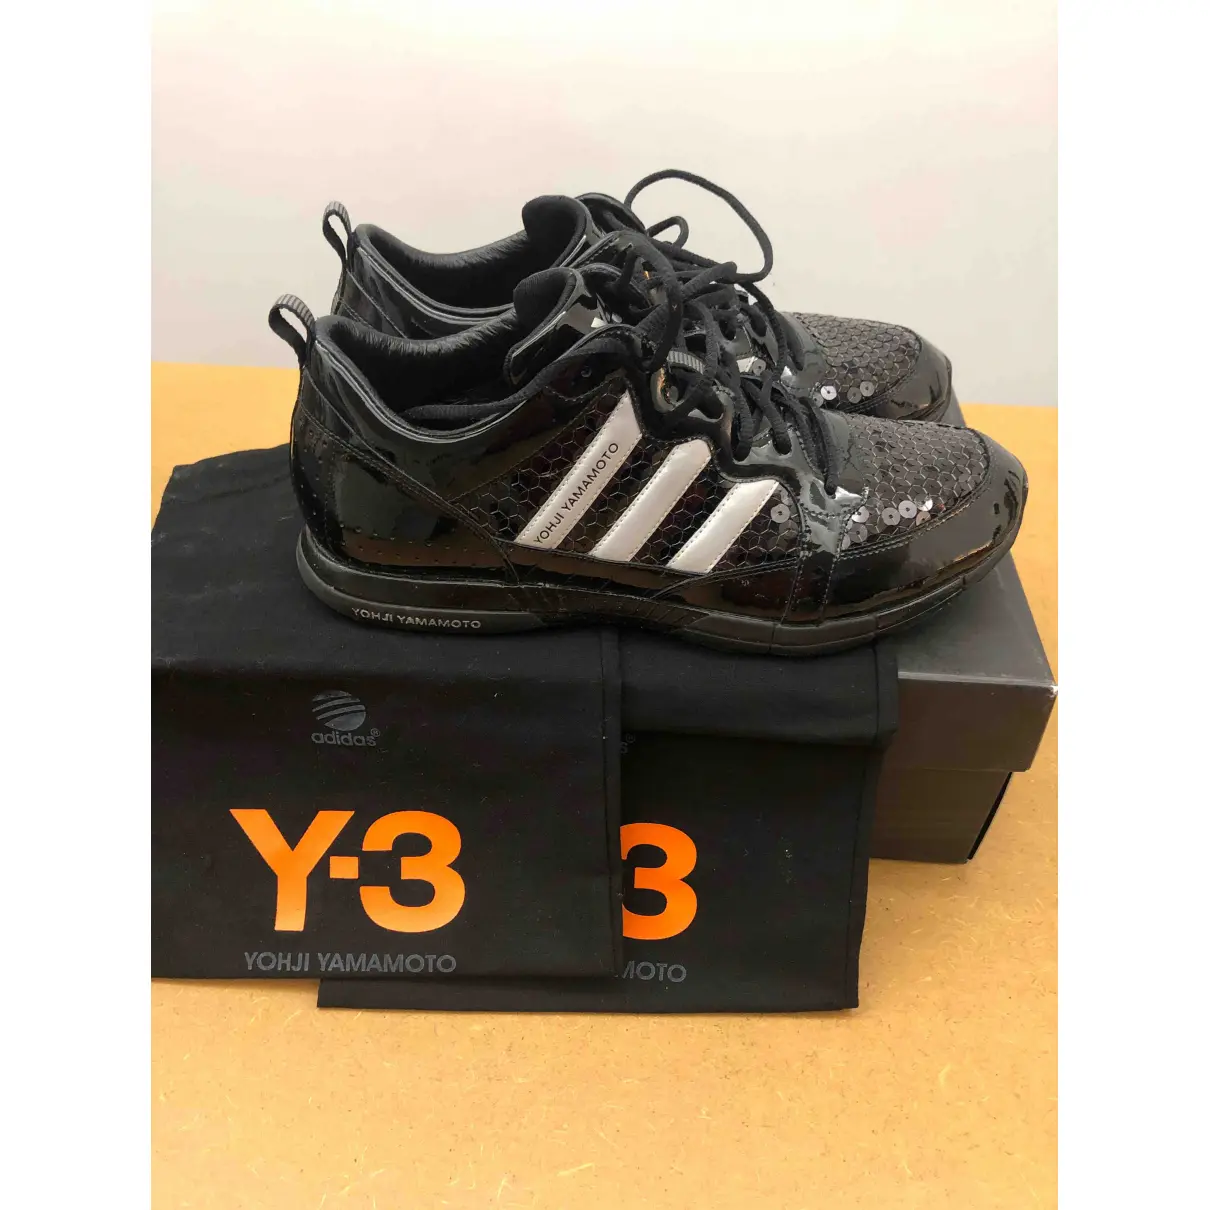 Patent leather low trainers Y-3 by Yohji Yamamoto